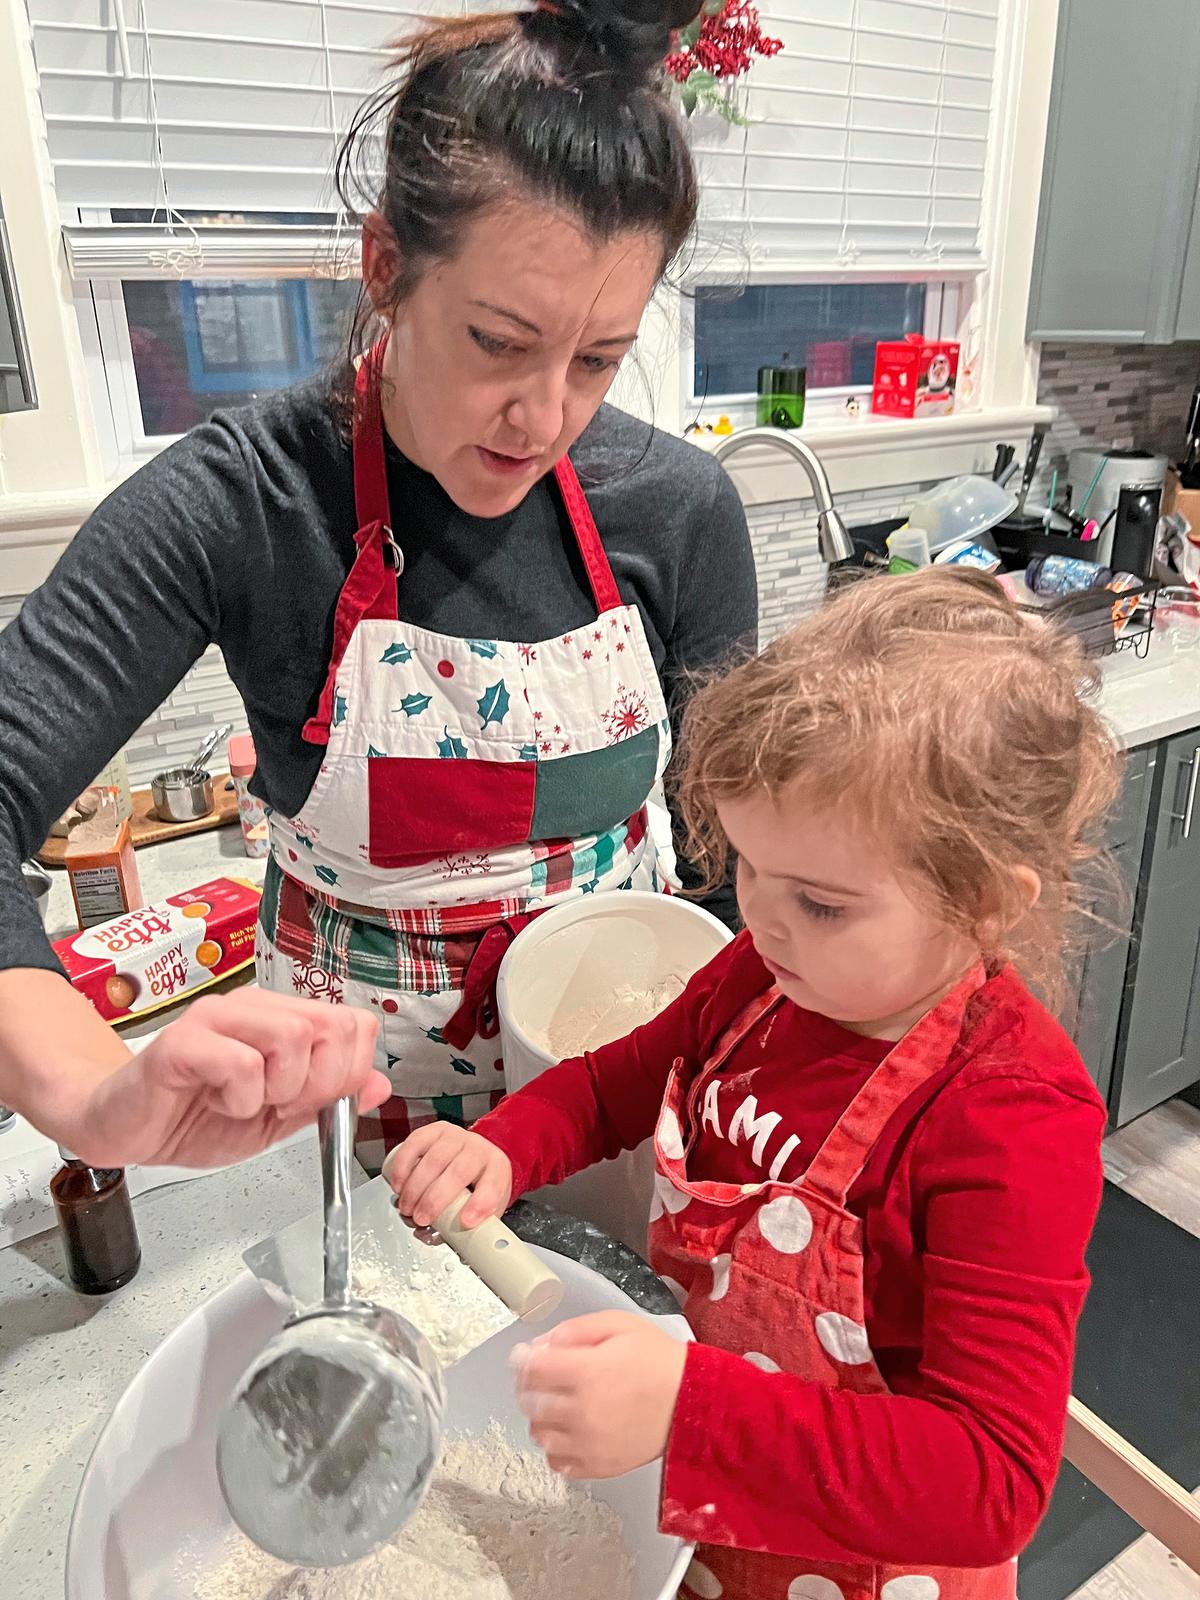 Lindsay Gardner and her 3-year-old daughter, Ellie, measure flour into a mixing bowl for cookies. (Gretchen McKay/Pittsburgh Post-Gazette/TNS)